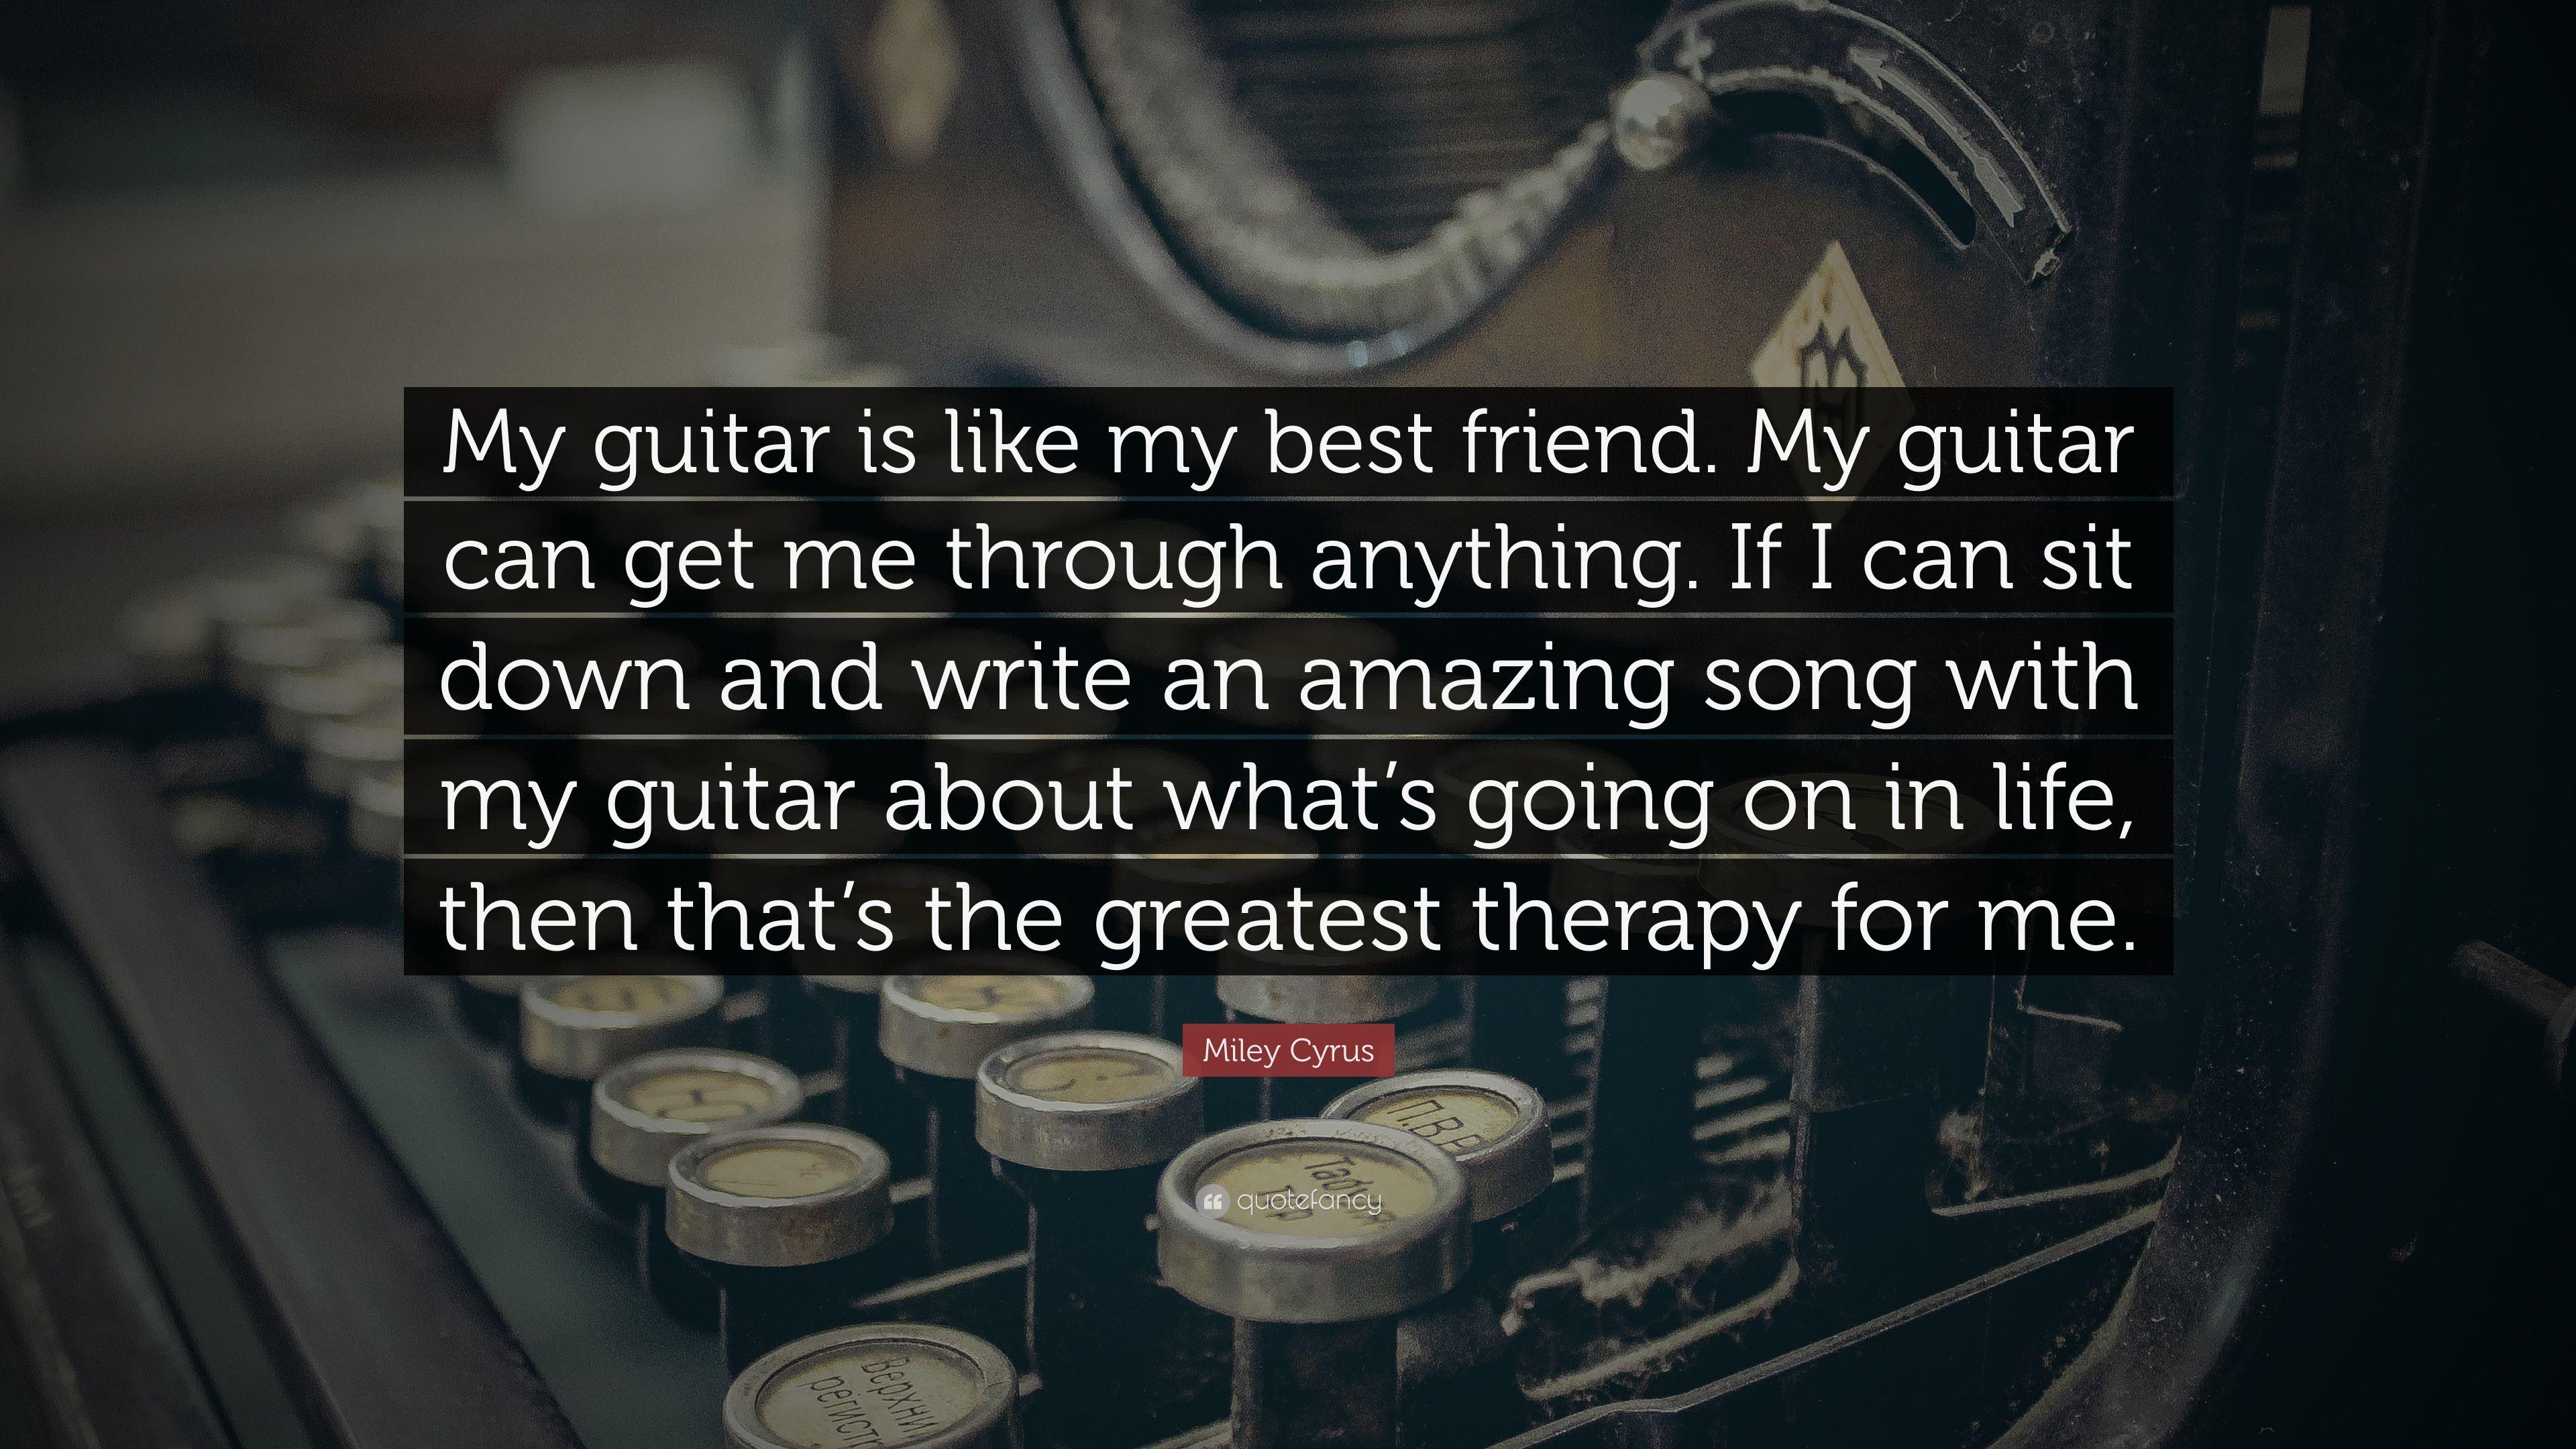 Miley Cyrus Quote: “My guitar is like my best friend. My guitar can